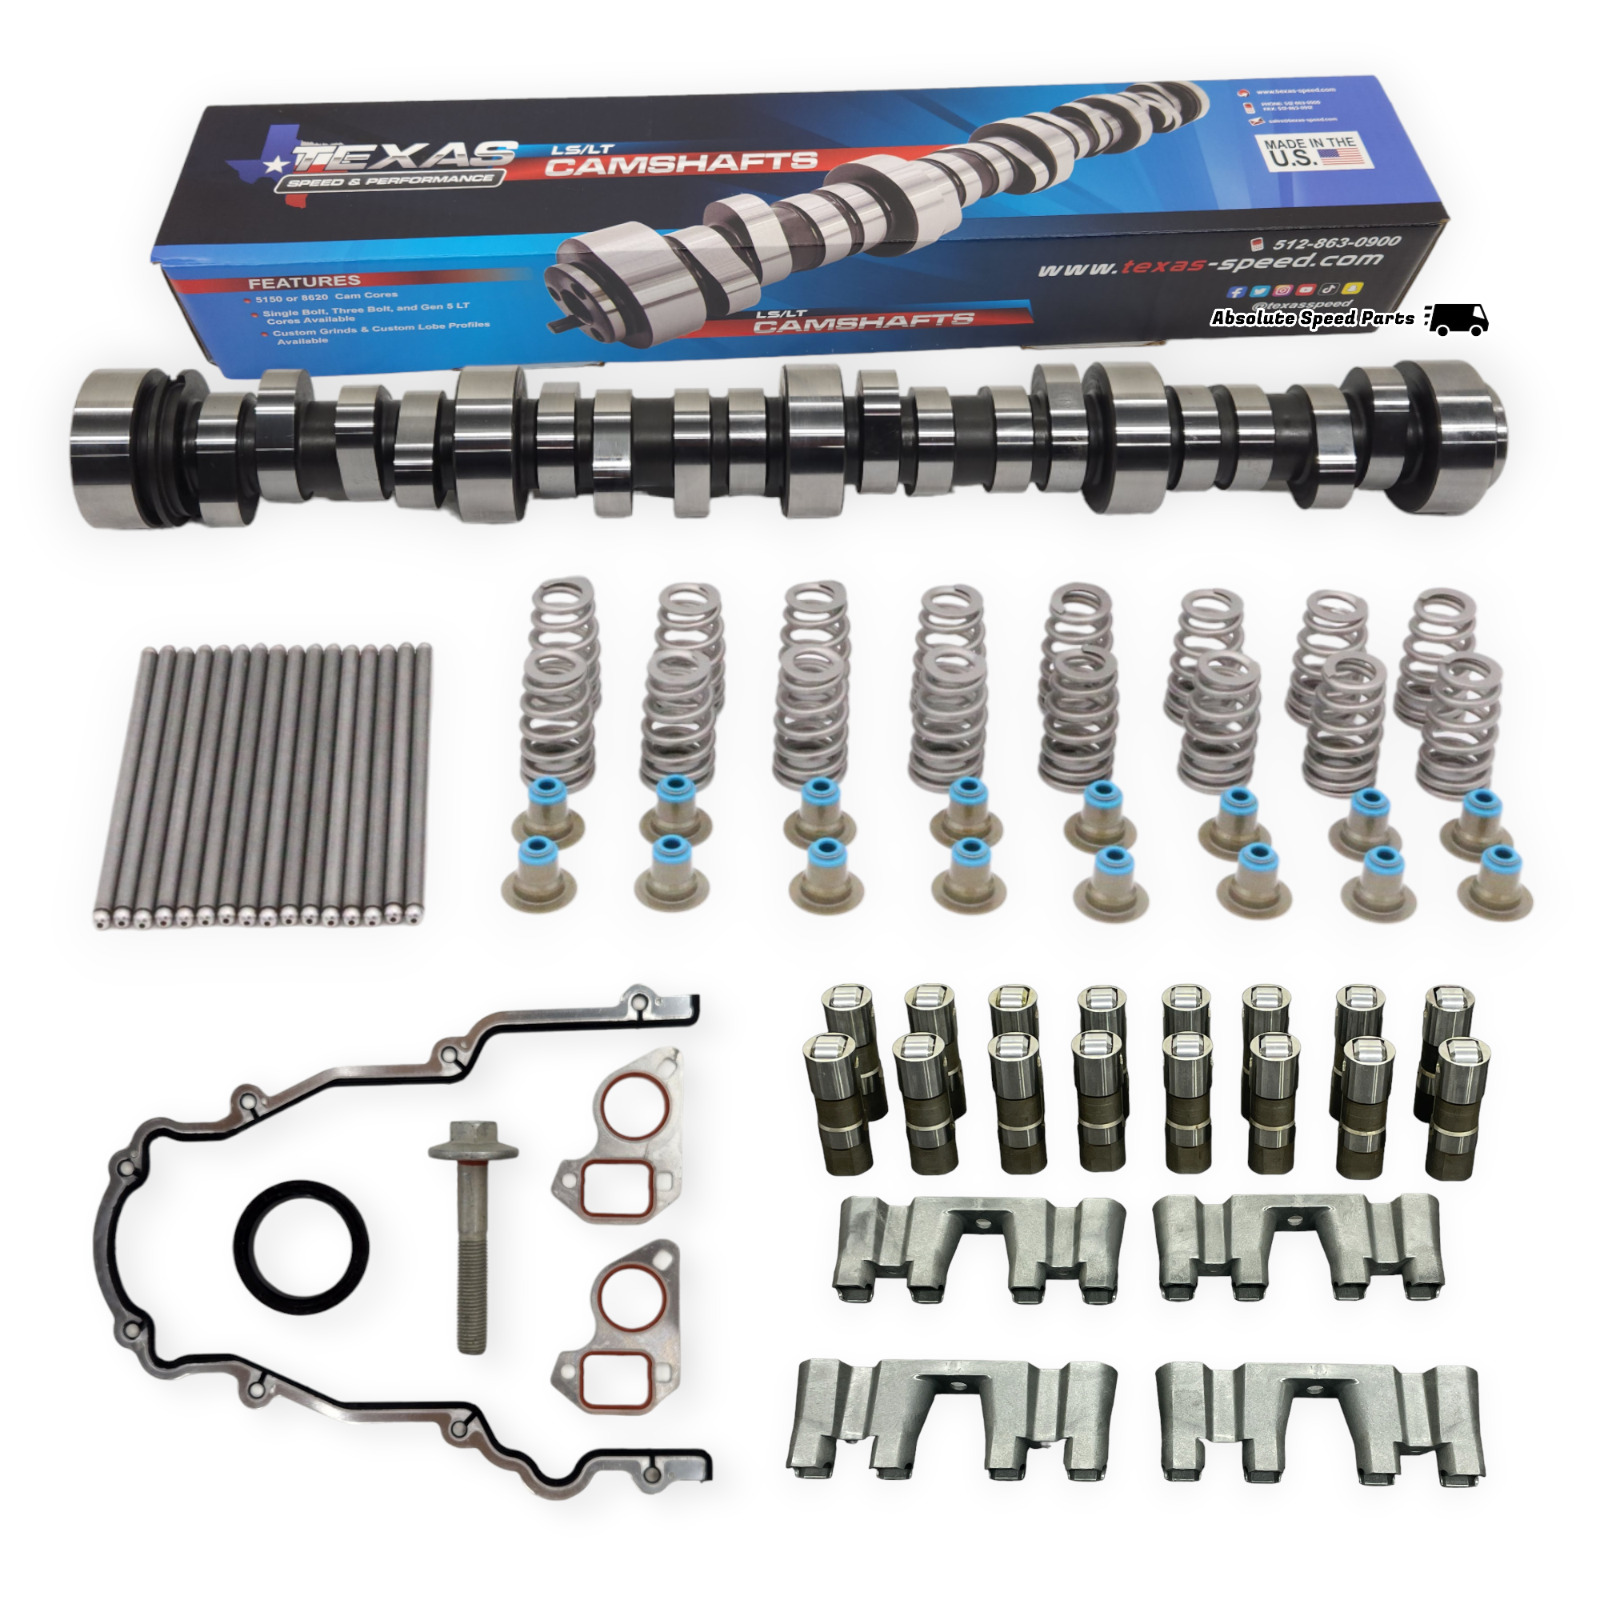 TSP Texas Speed Chopacabra LS Truck Cam Kit with Pushrods Lifters Trays 4.8 5.3